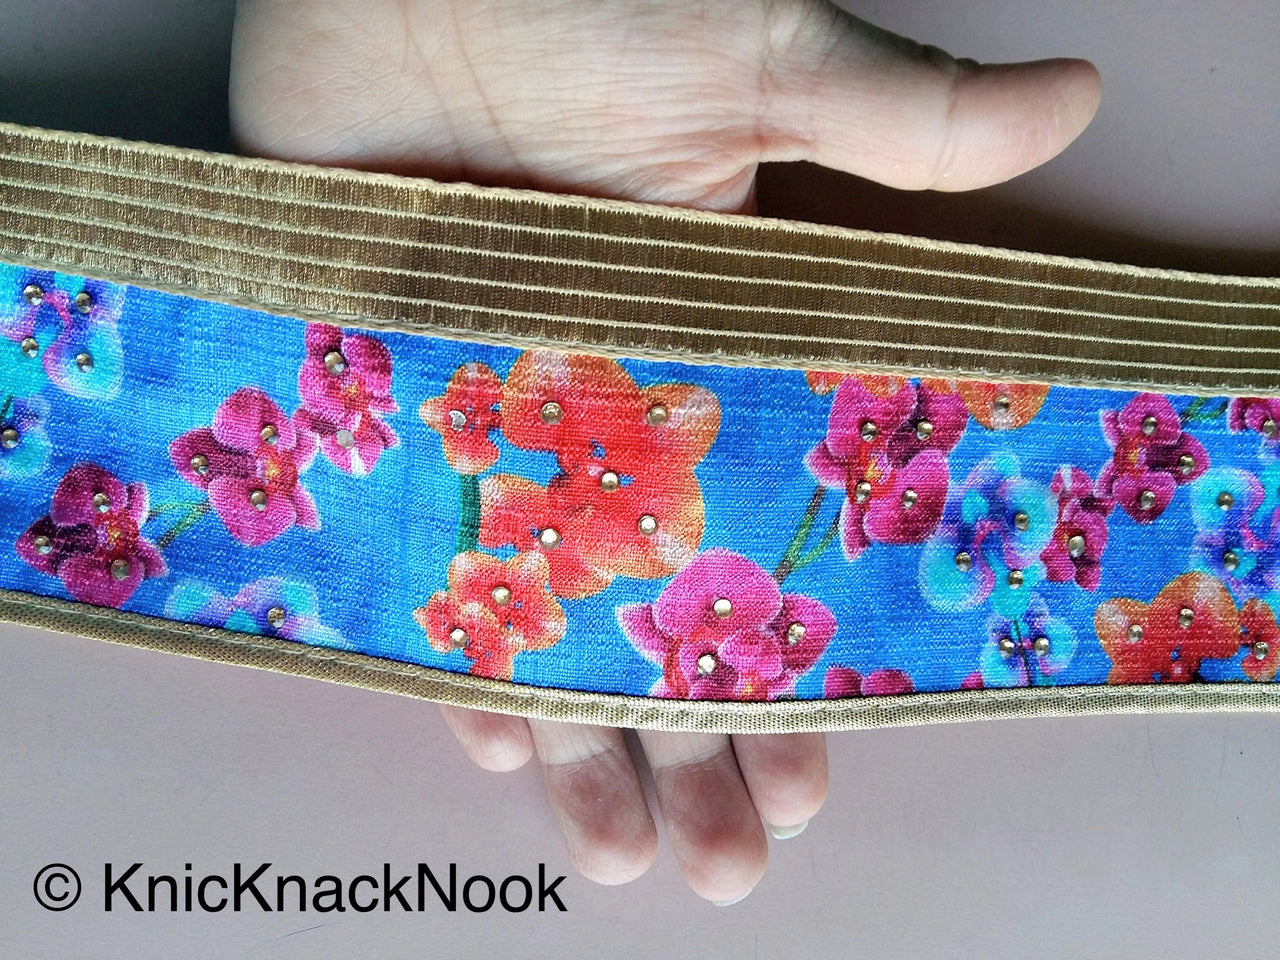 Blue And Gold Fabric Trim With Pink, Orange And Blue Floral Design Embellished With Diamantes, Digital Print Trim Border - 200317L403